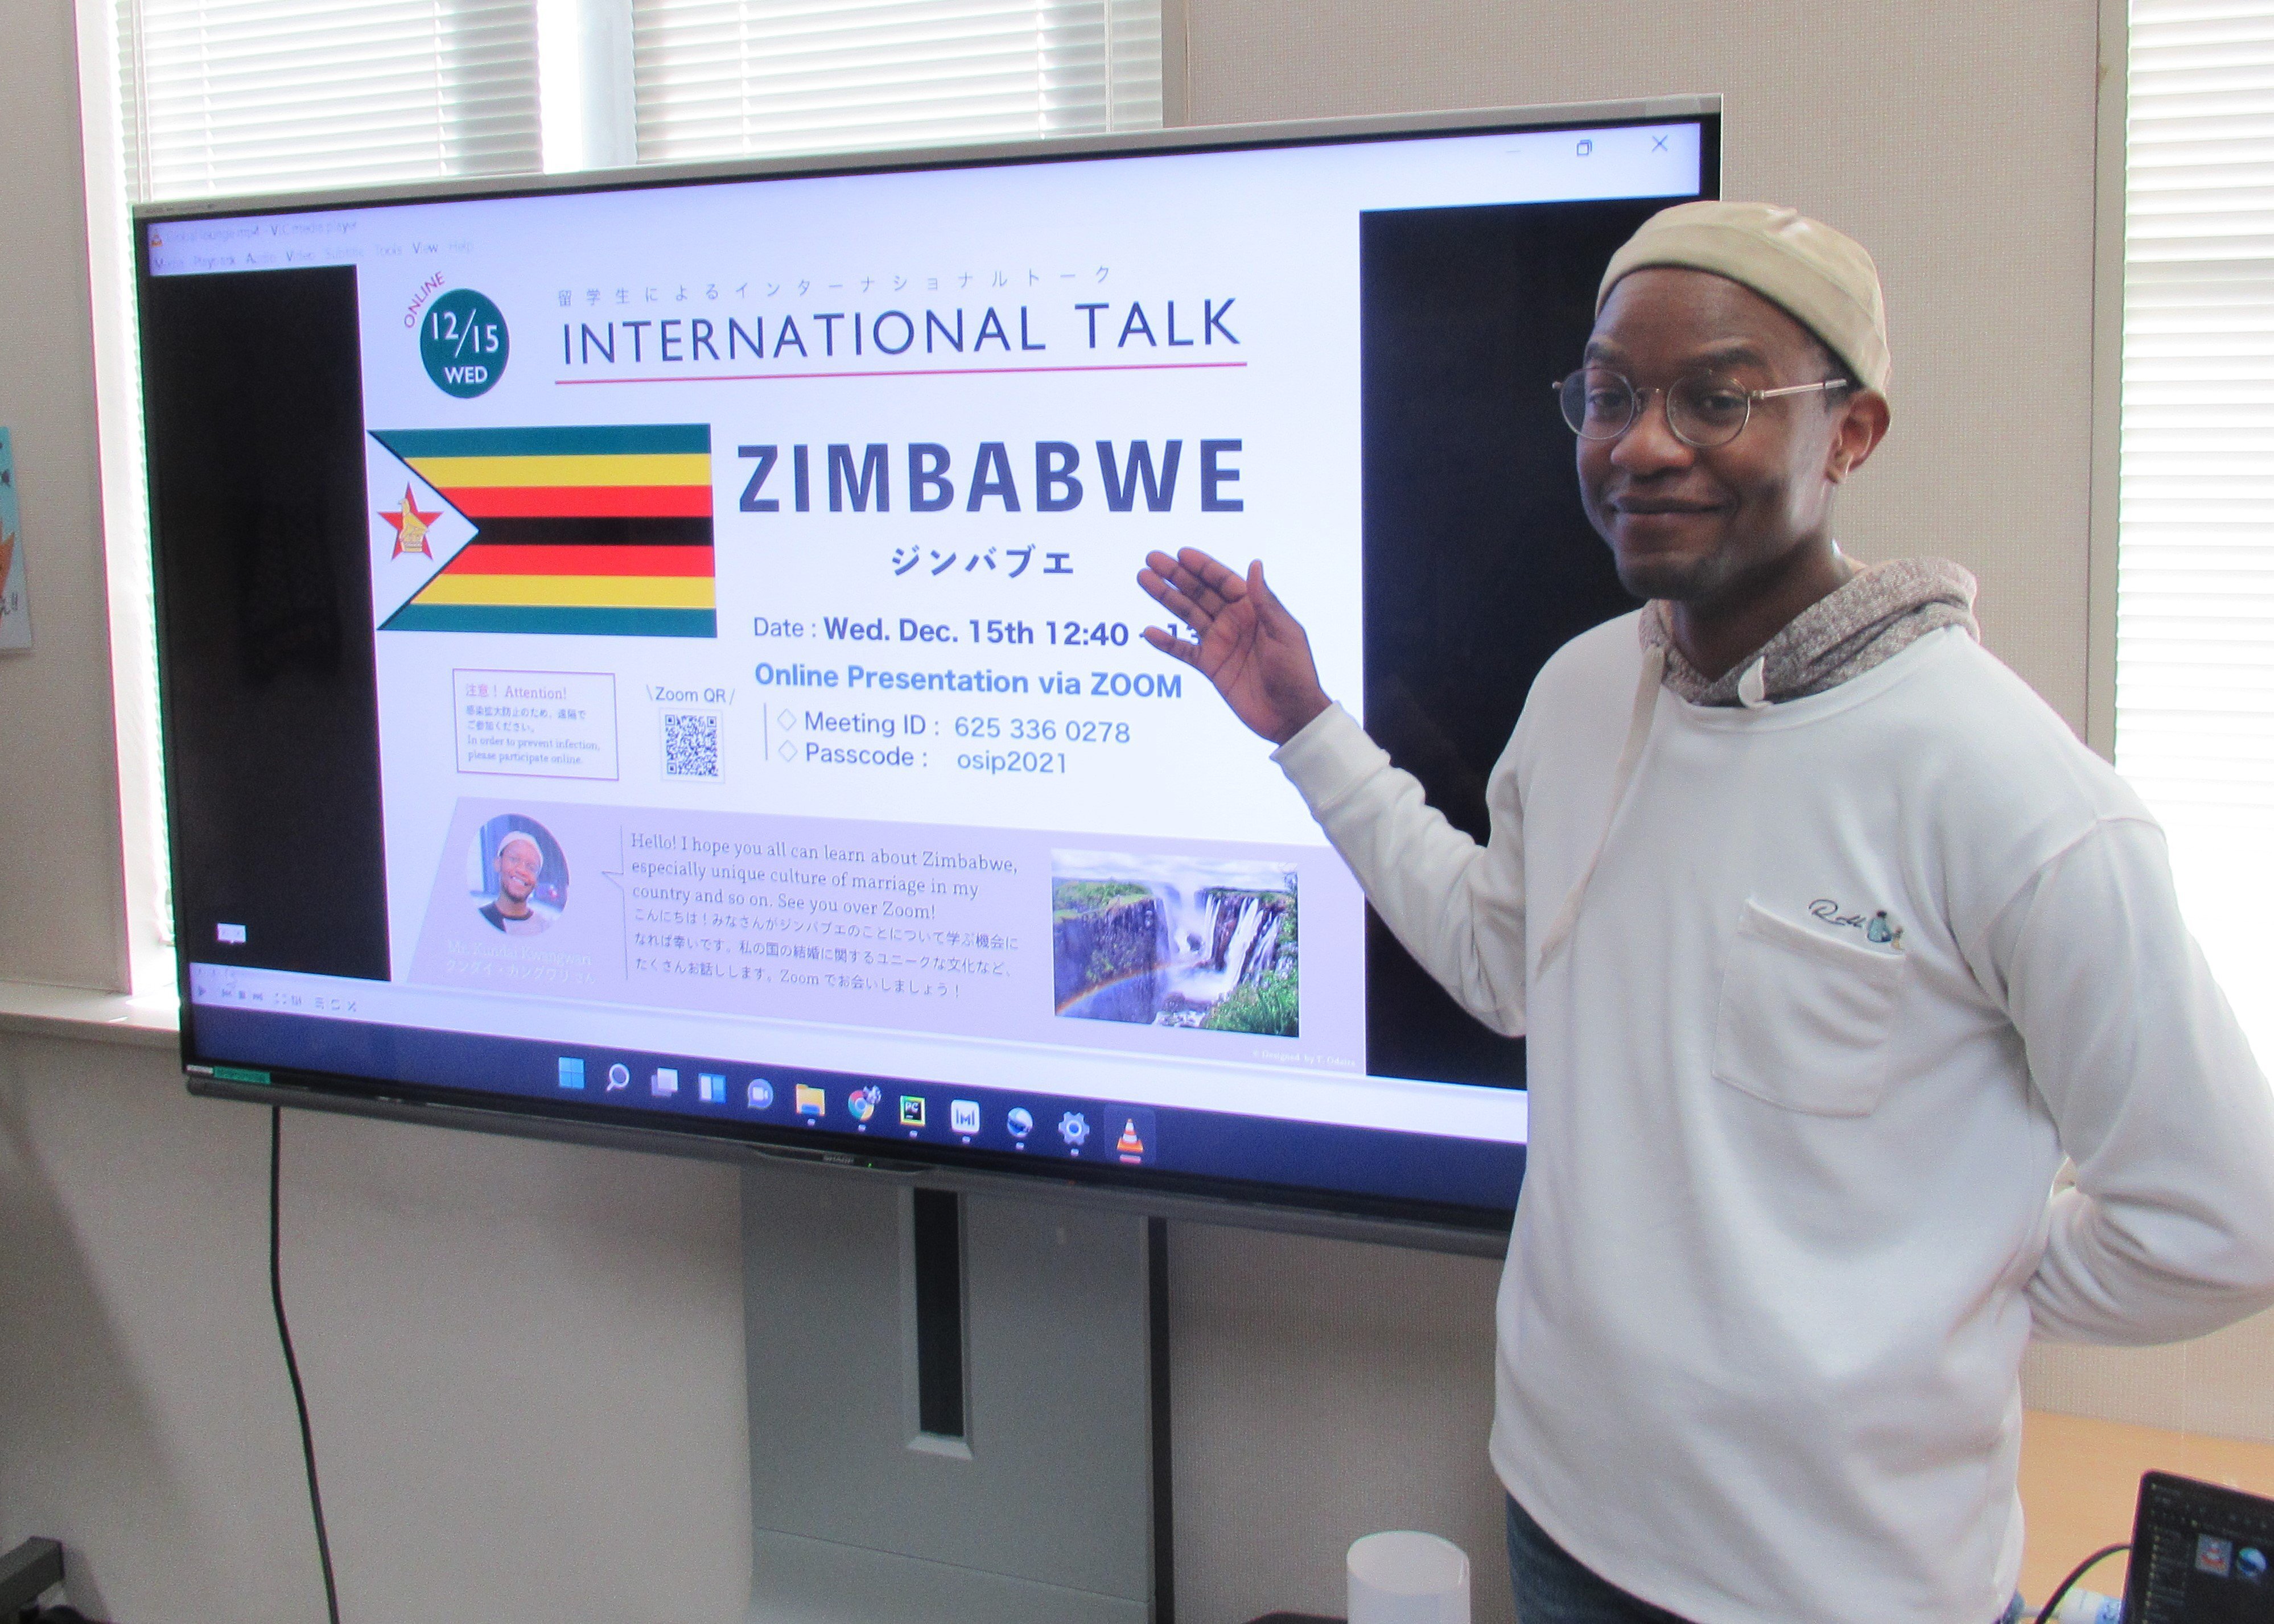 International Talk: Lets learn about the attractiveness of Zimbabwe online! was held!